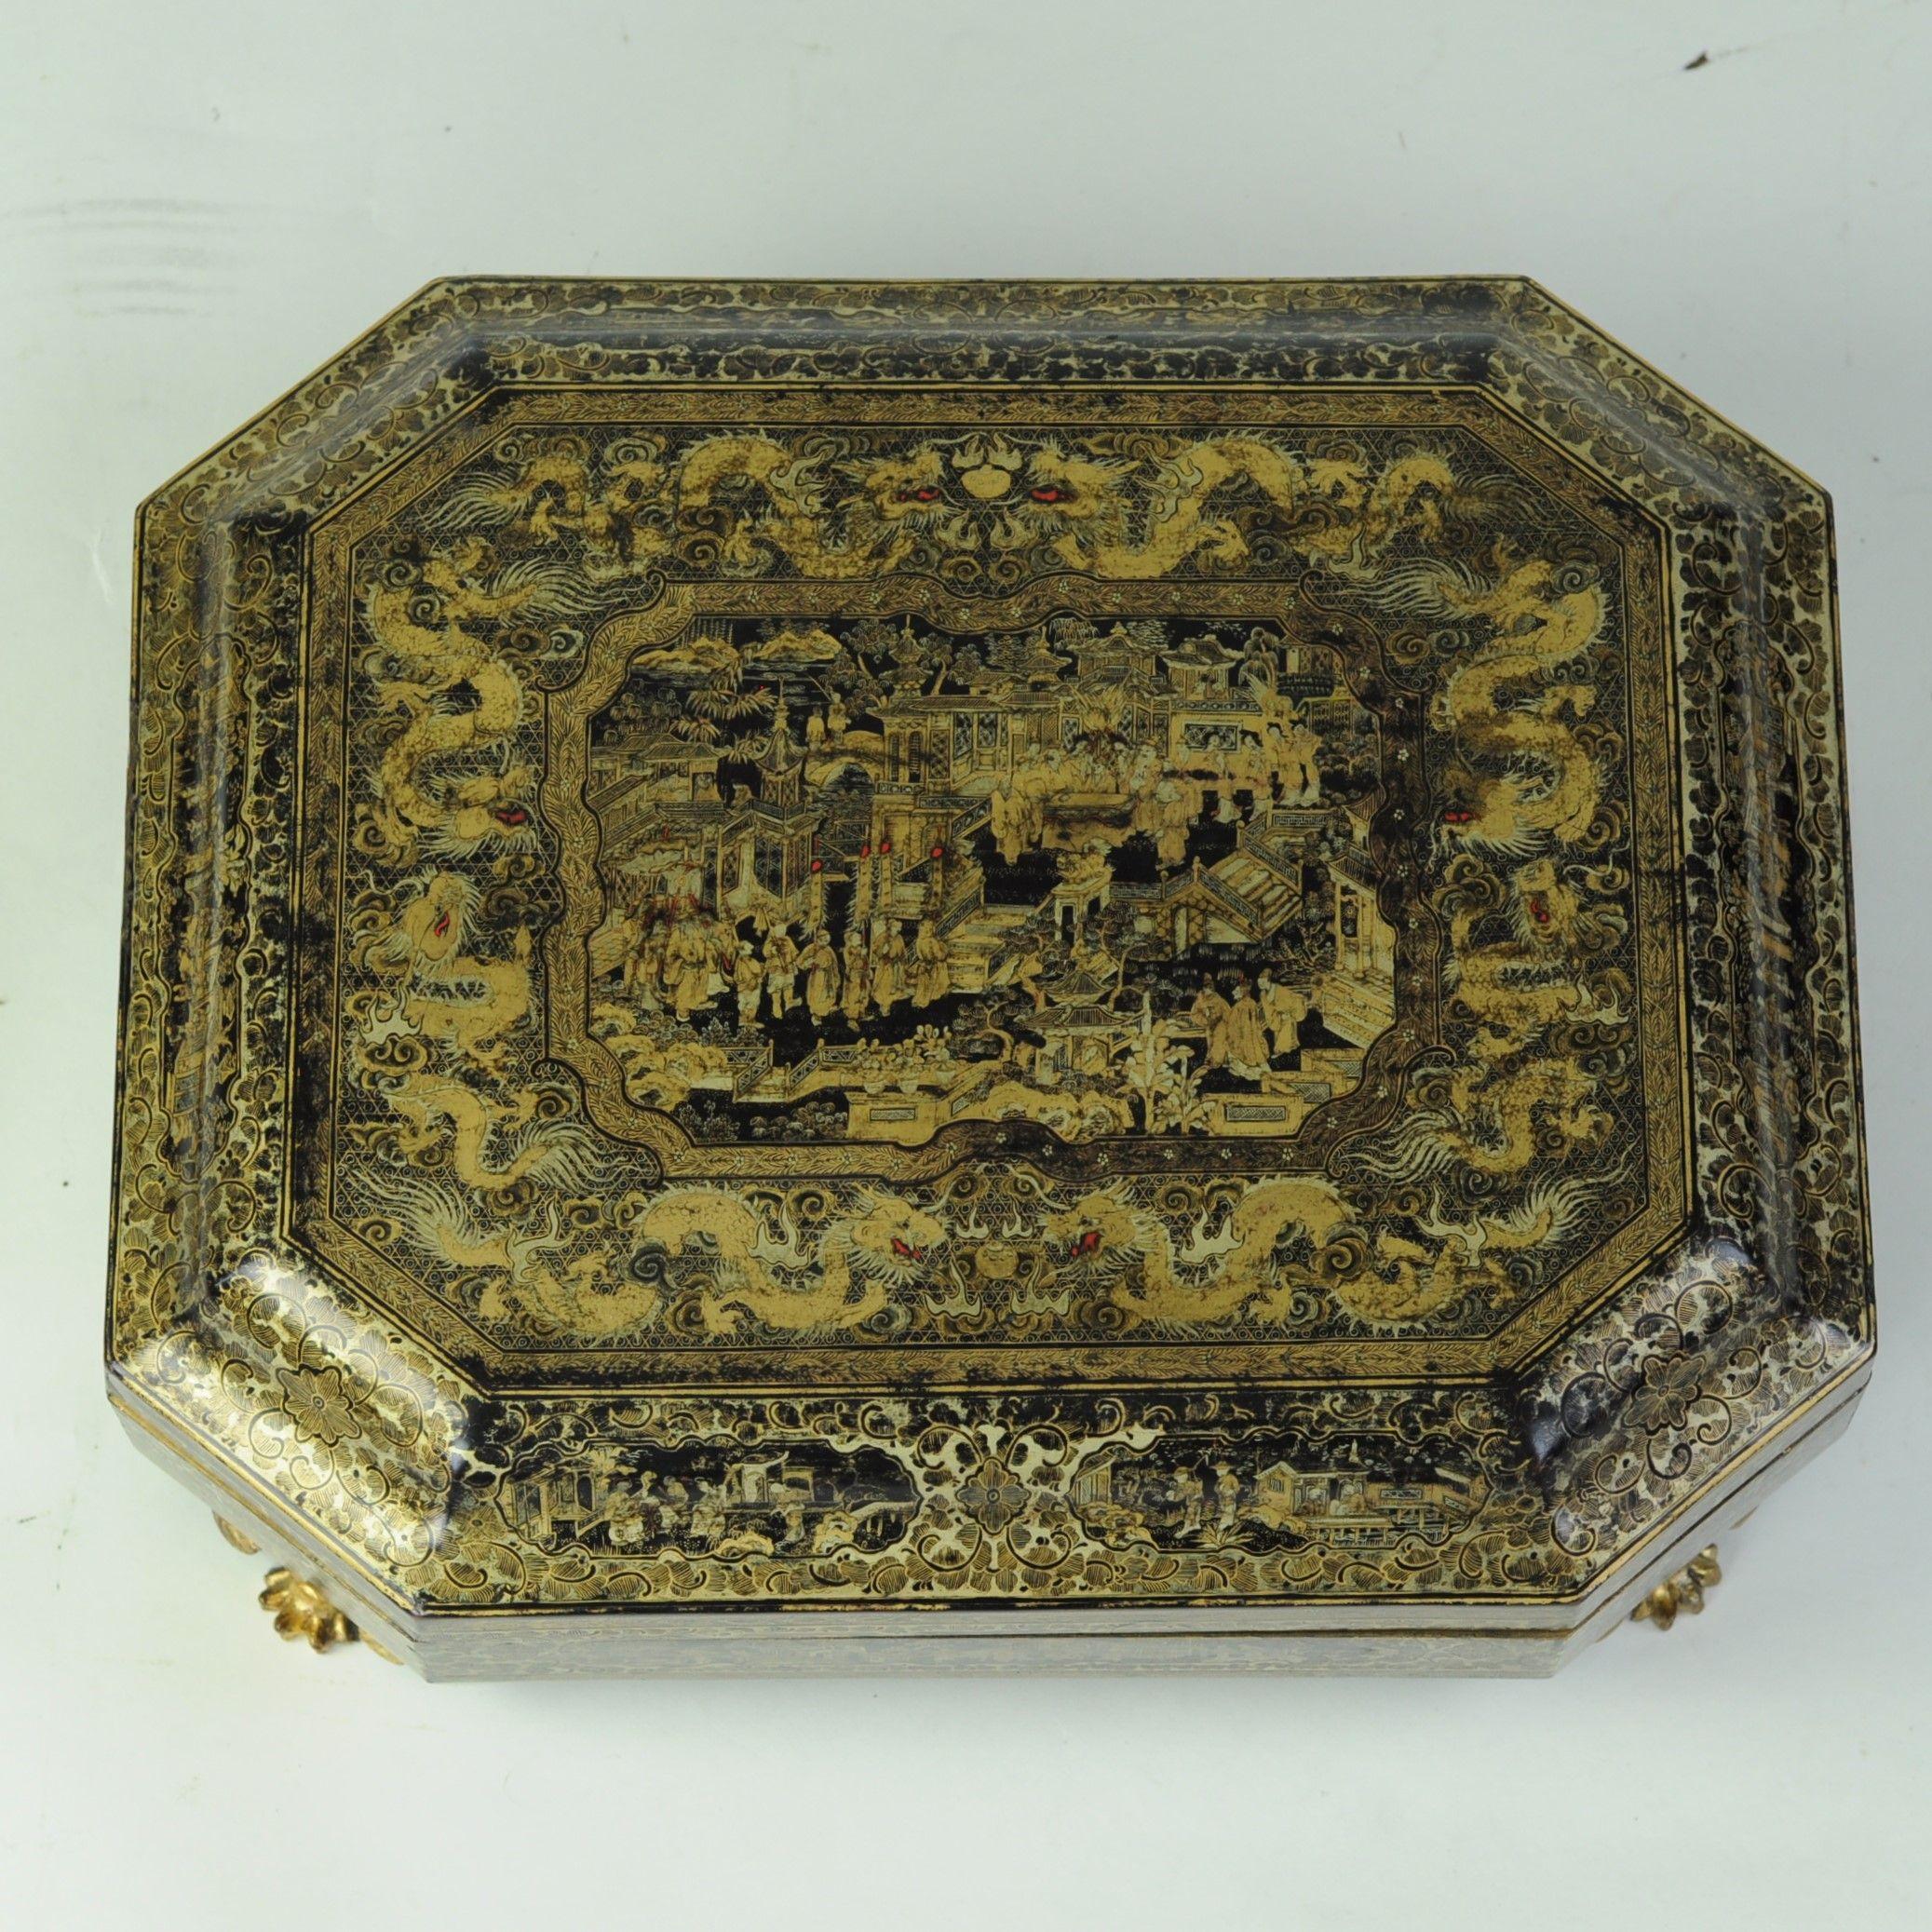 A rare and complete mid 19th century papier-mâché Games Box decorated with a central pen-work scene to the top depicting a gathering of Chinese figures on a terrace of a building surrounded by lush gardens with steps and terraces and further